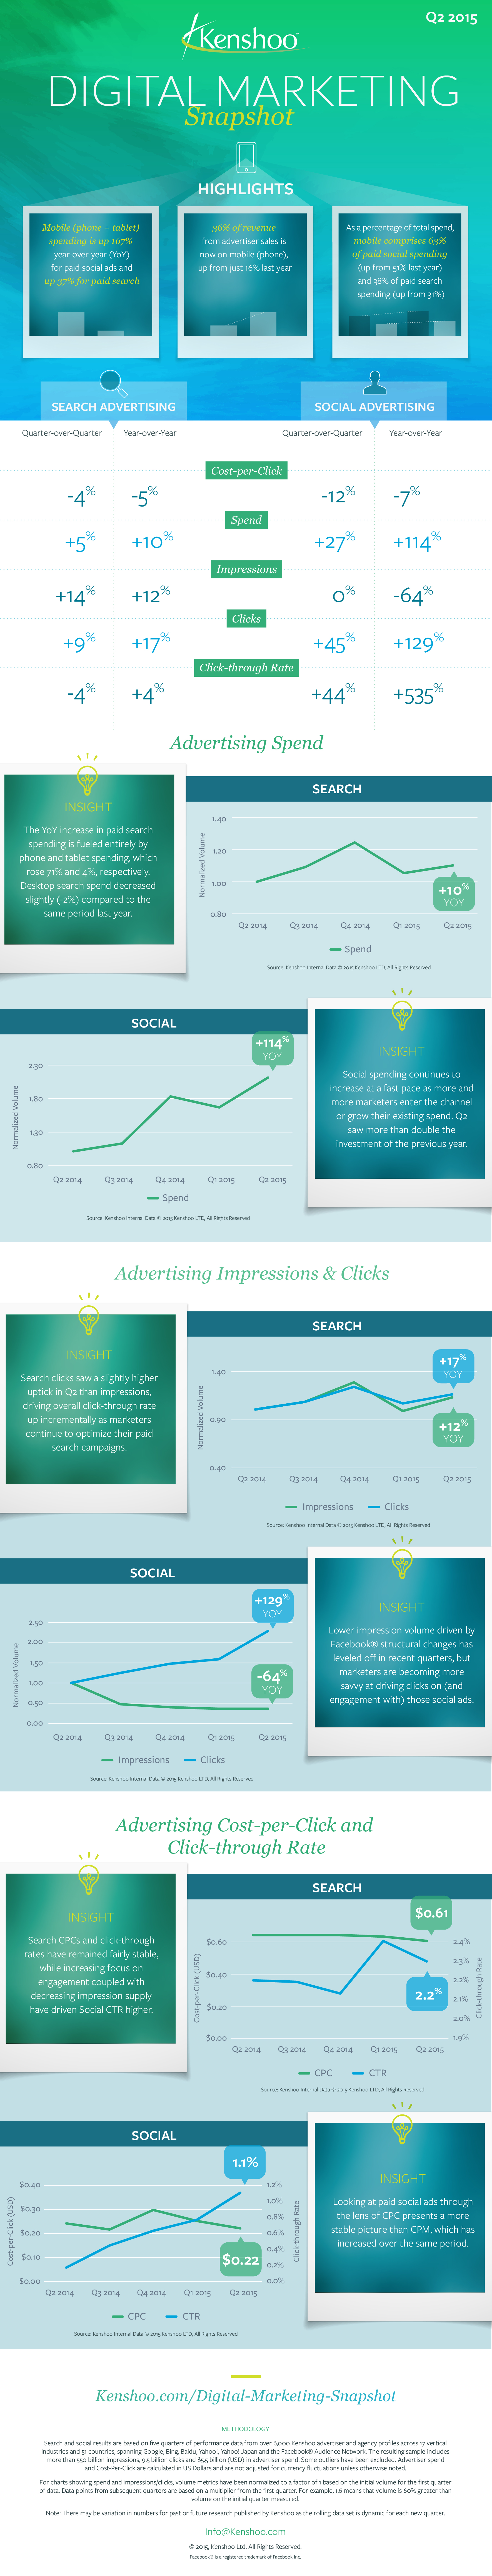 Mobile Social Ads are Driving Clicks AND Big Results #infographic